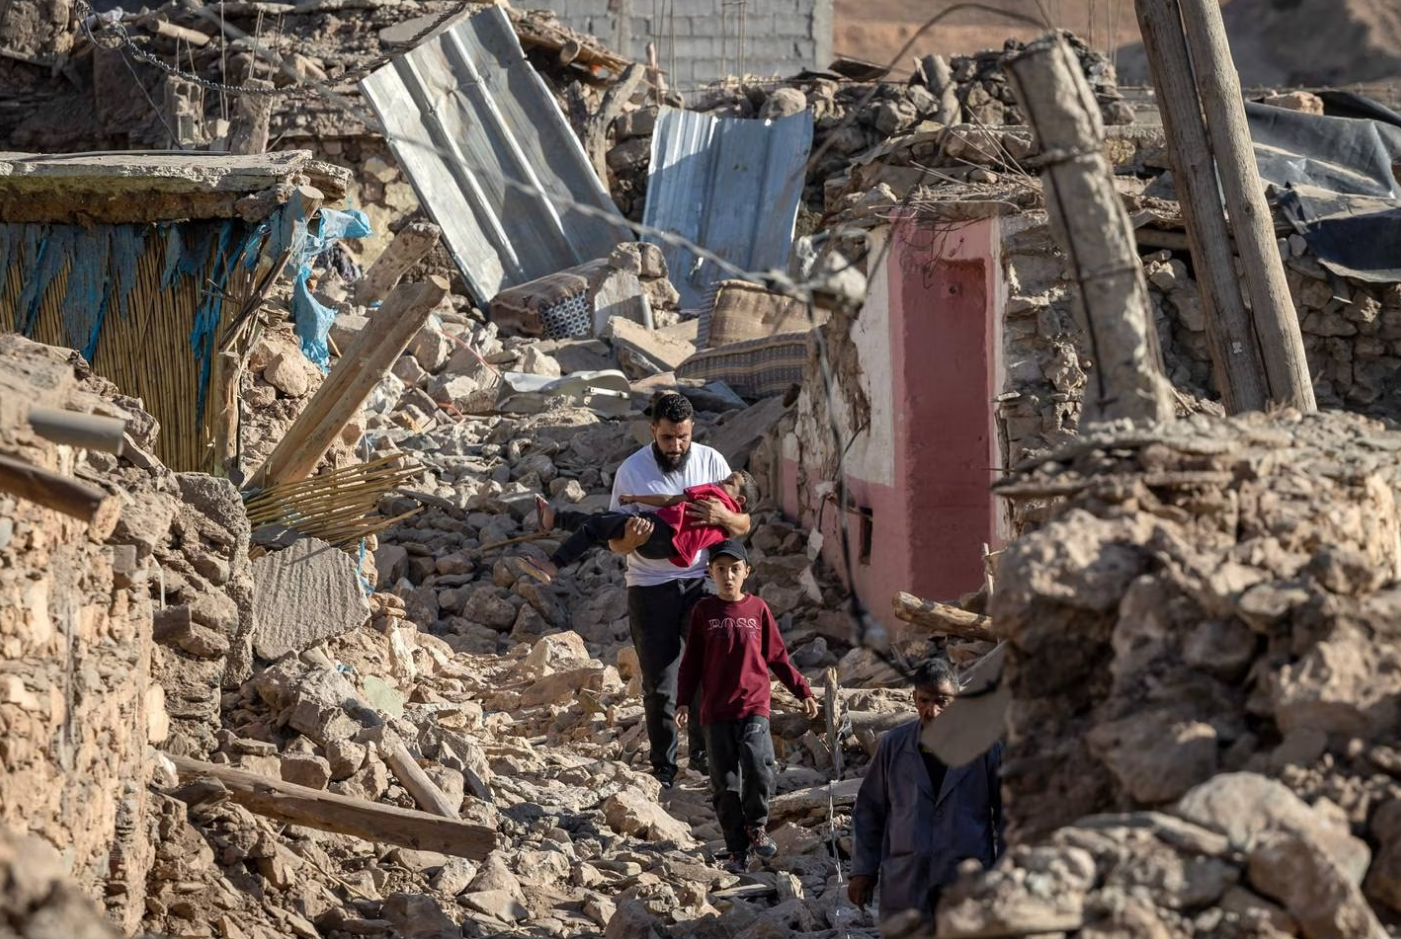 “Life Altered Forever”: Devastating Morocco Earthquake Claims an Entire Village